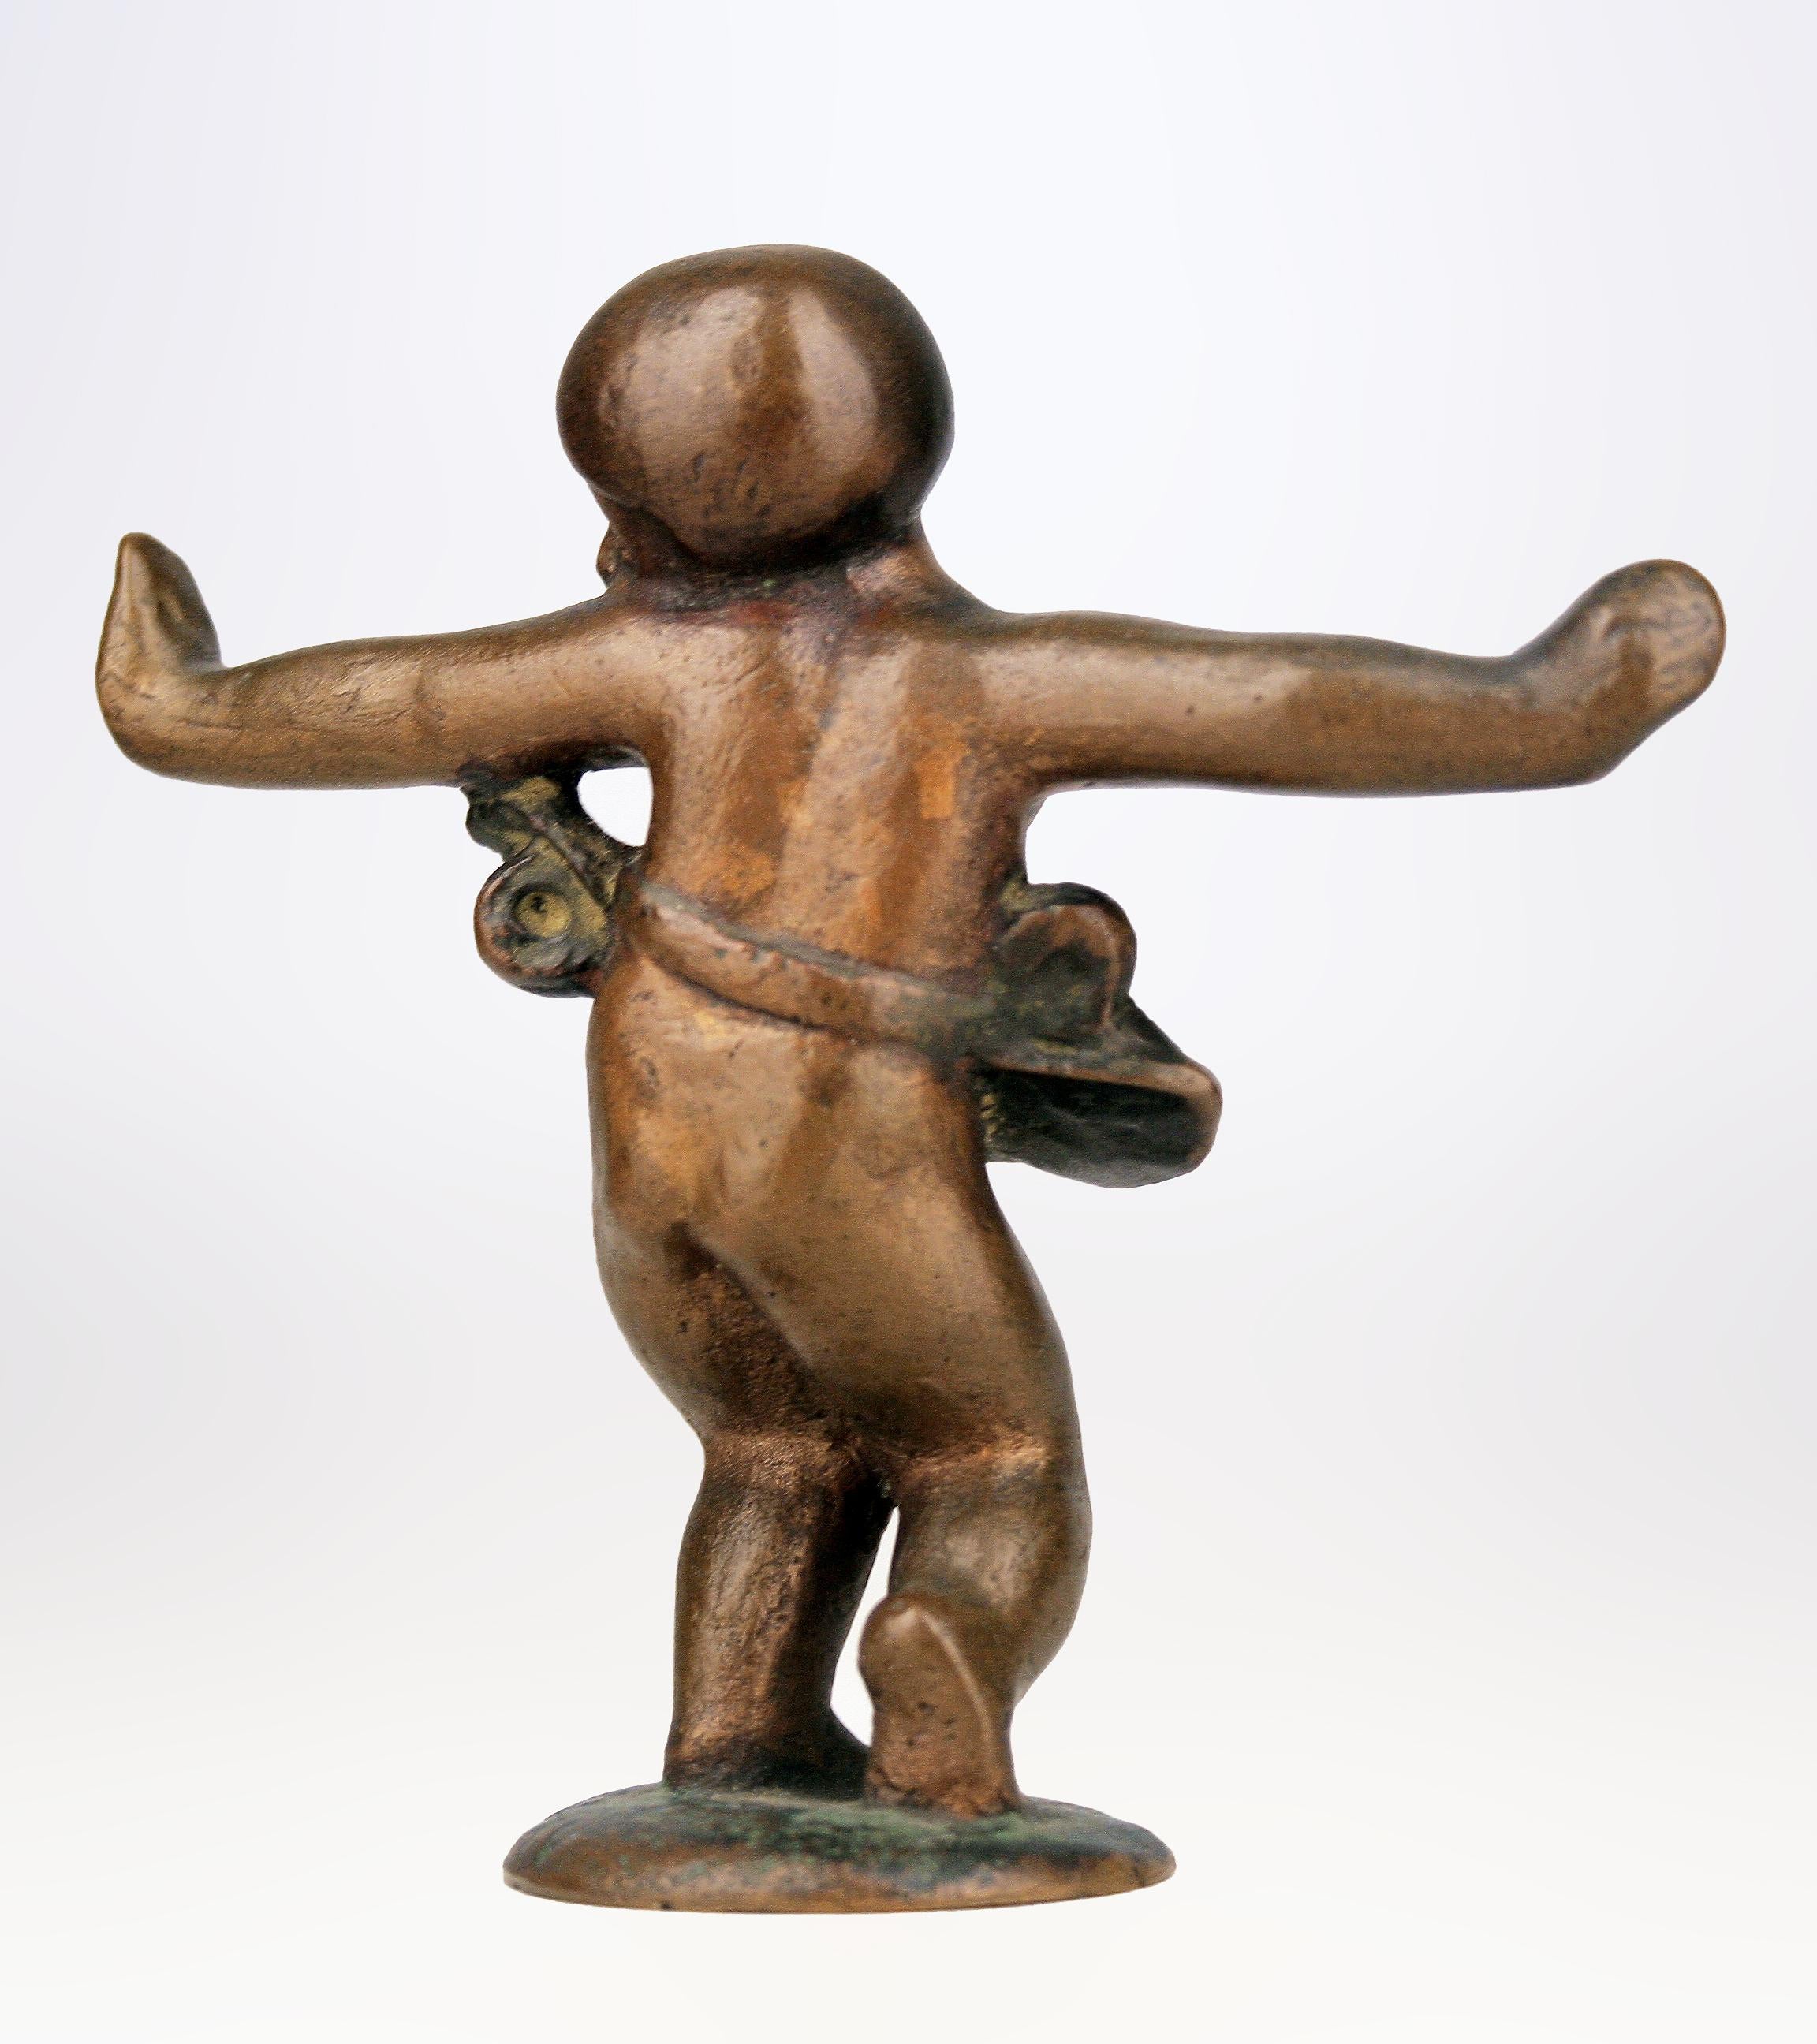 Early 20th Century Art Déco Small Bronze Sculpture of Girl with Skirt Dancing In Good Condition For Sale In North Miami, FL